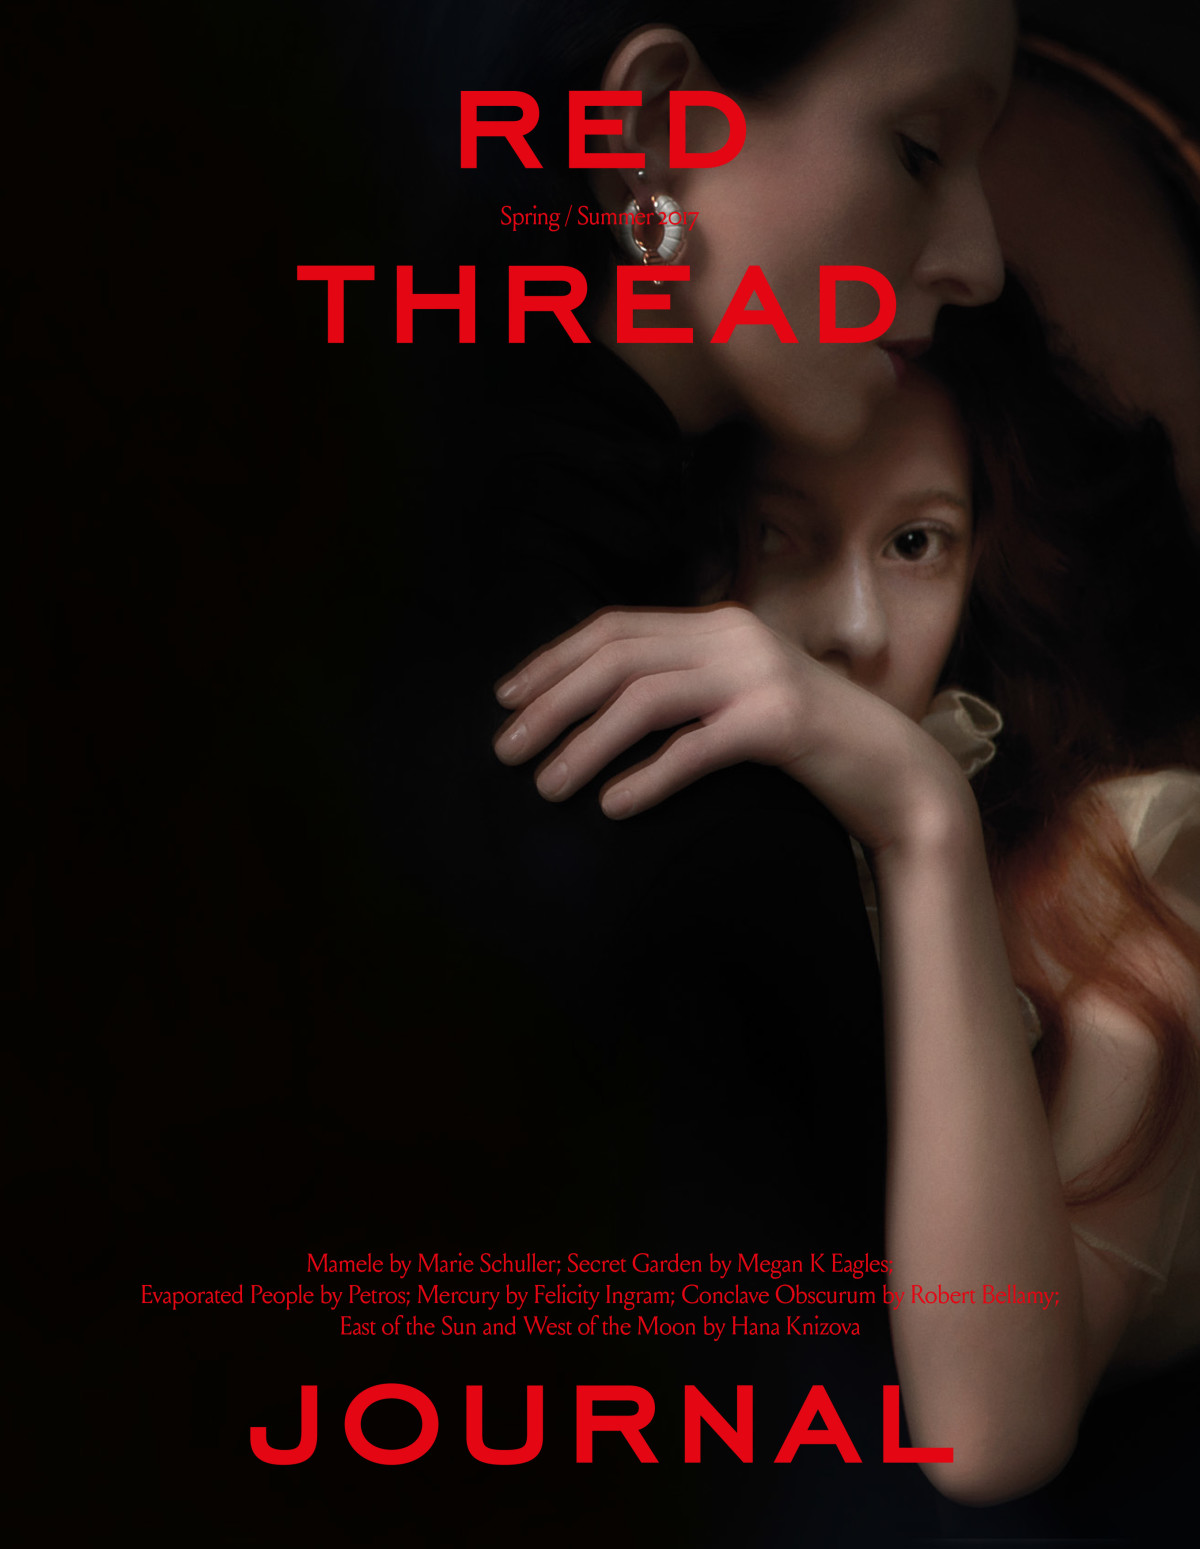 red thread journal cover story, Mamele by Marie schuller, twins, barnes twins, surrealism in fashion, Mar Gonzalez, Genevieve Welsh, Serge Lutens inspired Makeup, Sureal makeup